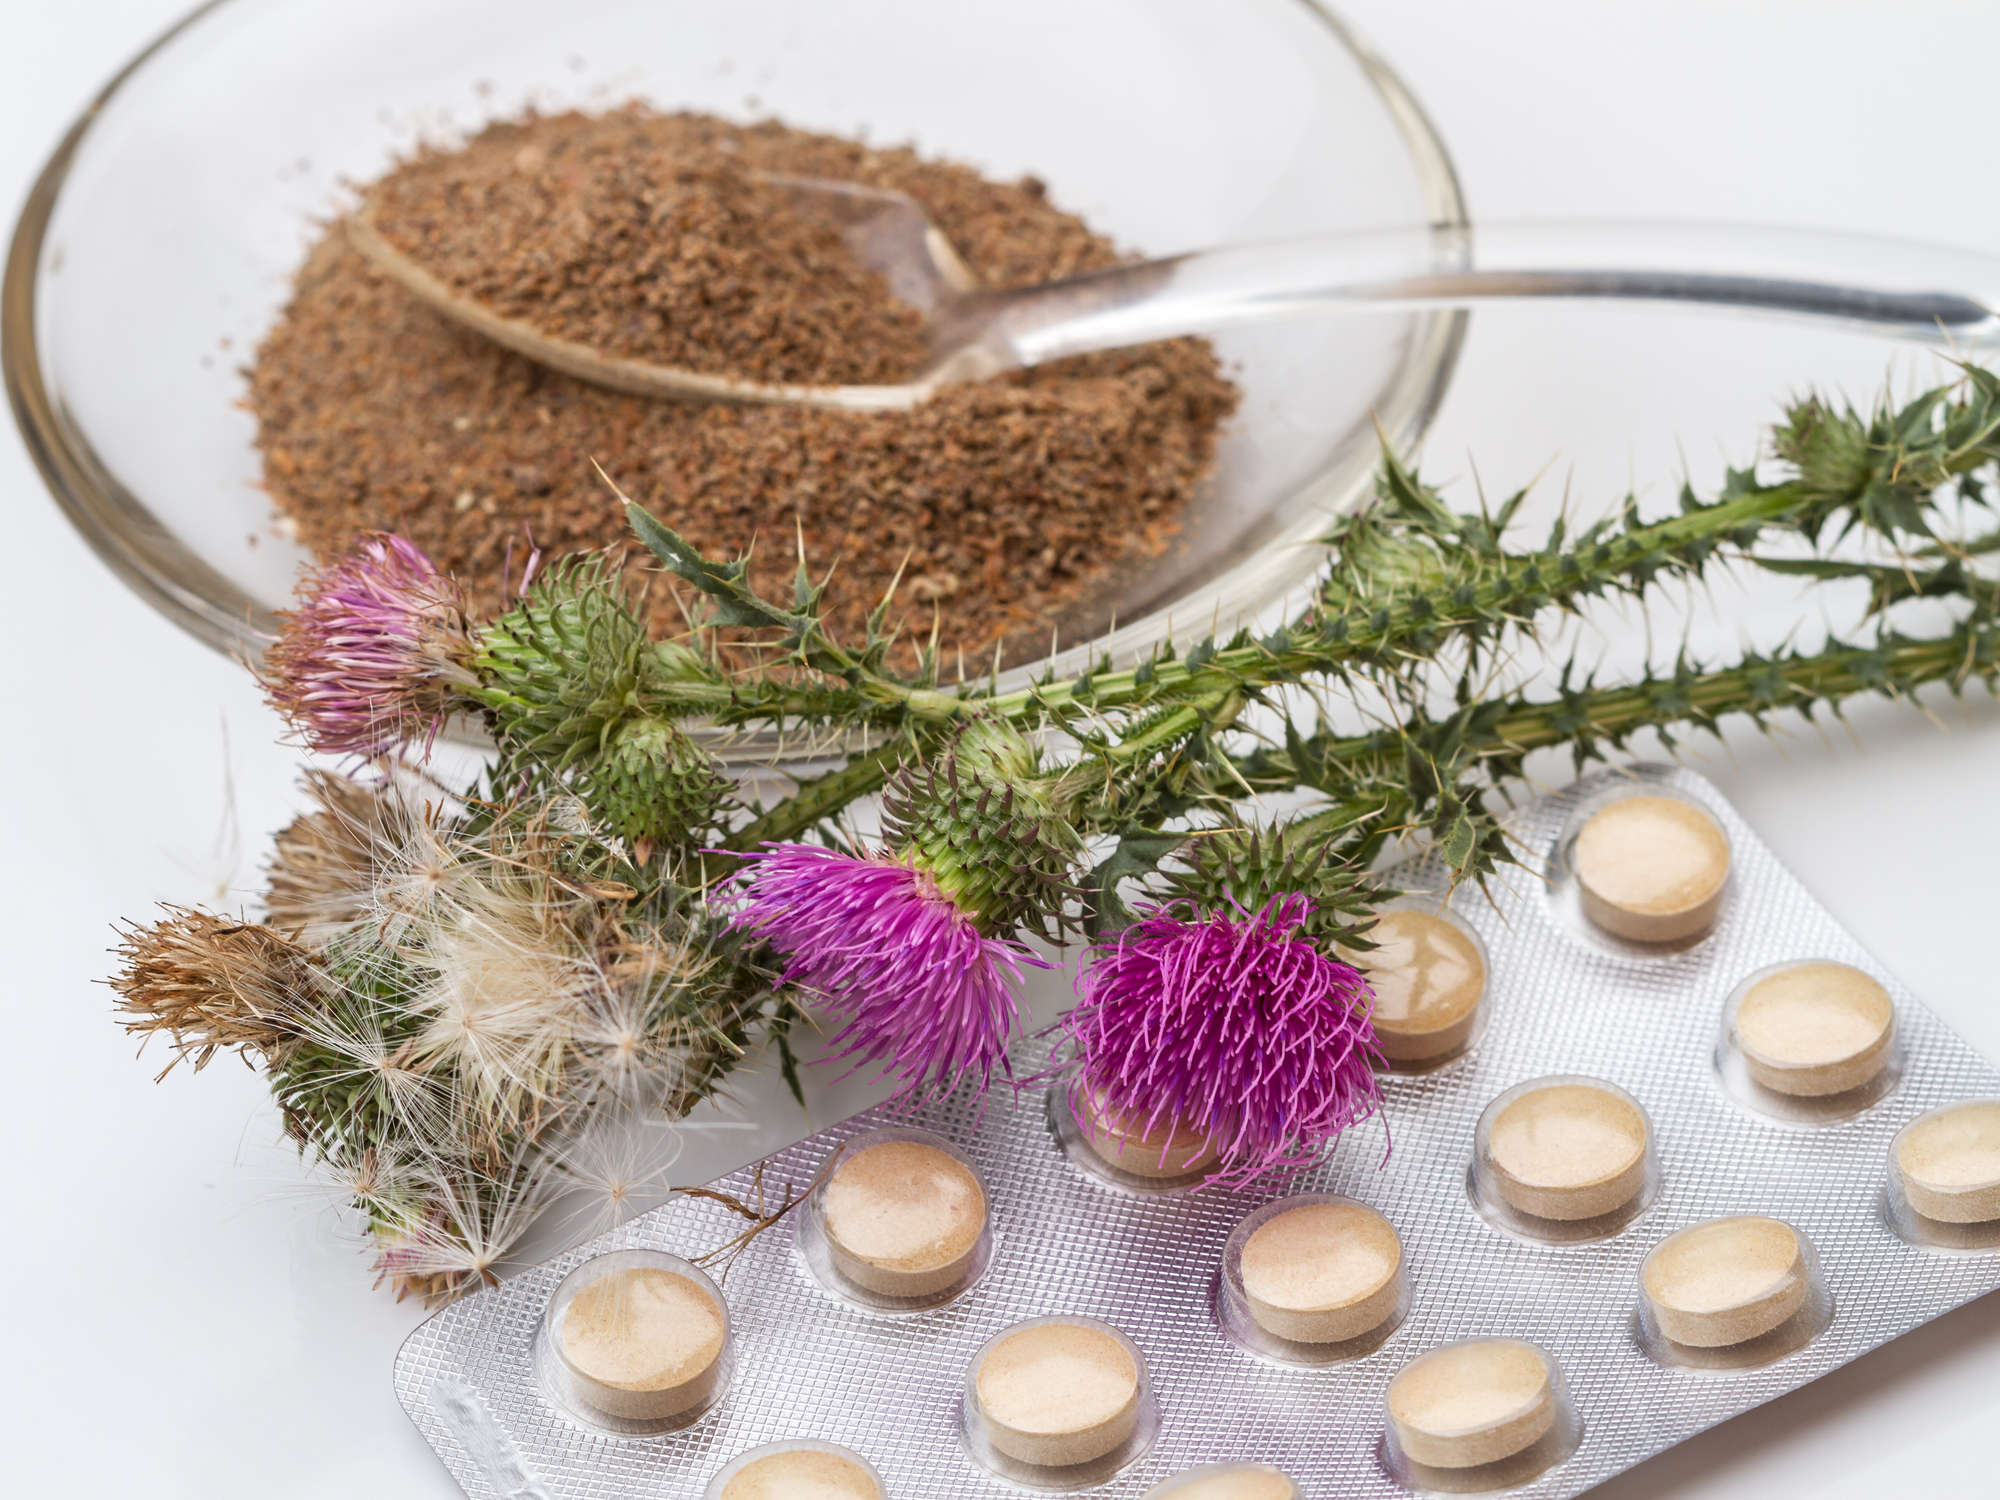 Milk thistle: All-in-one superherb